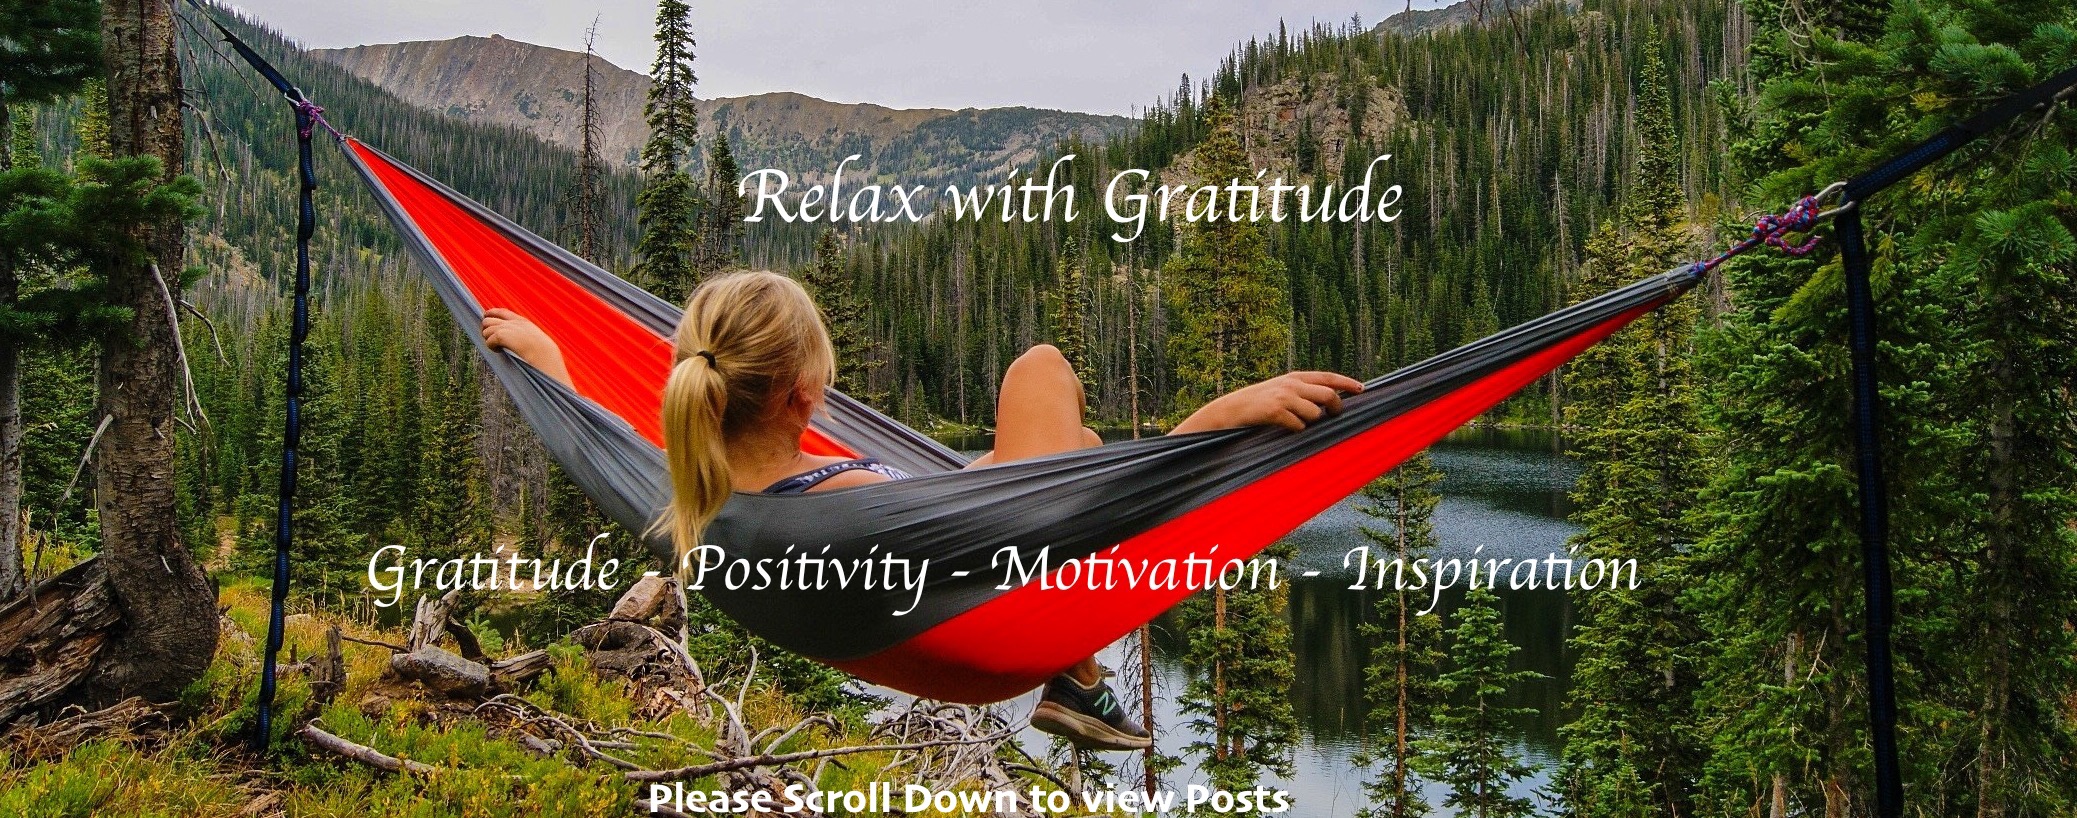 Relax with Gratitude